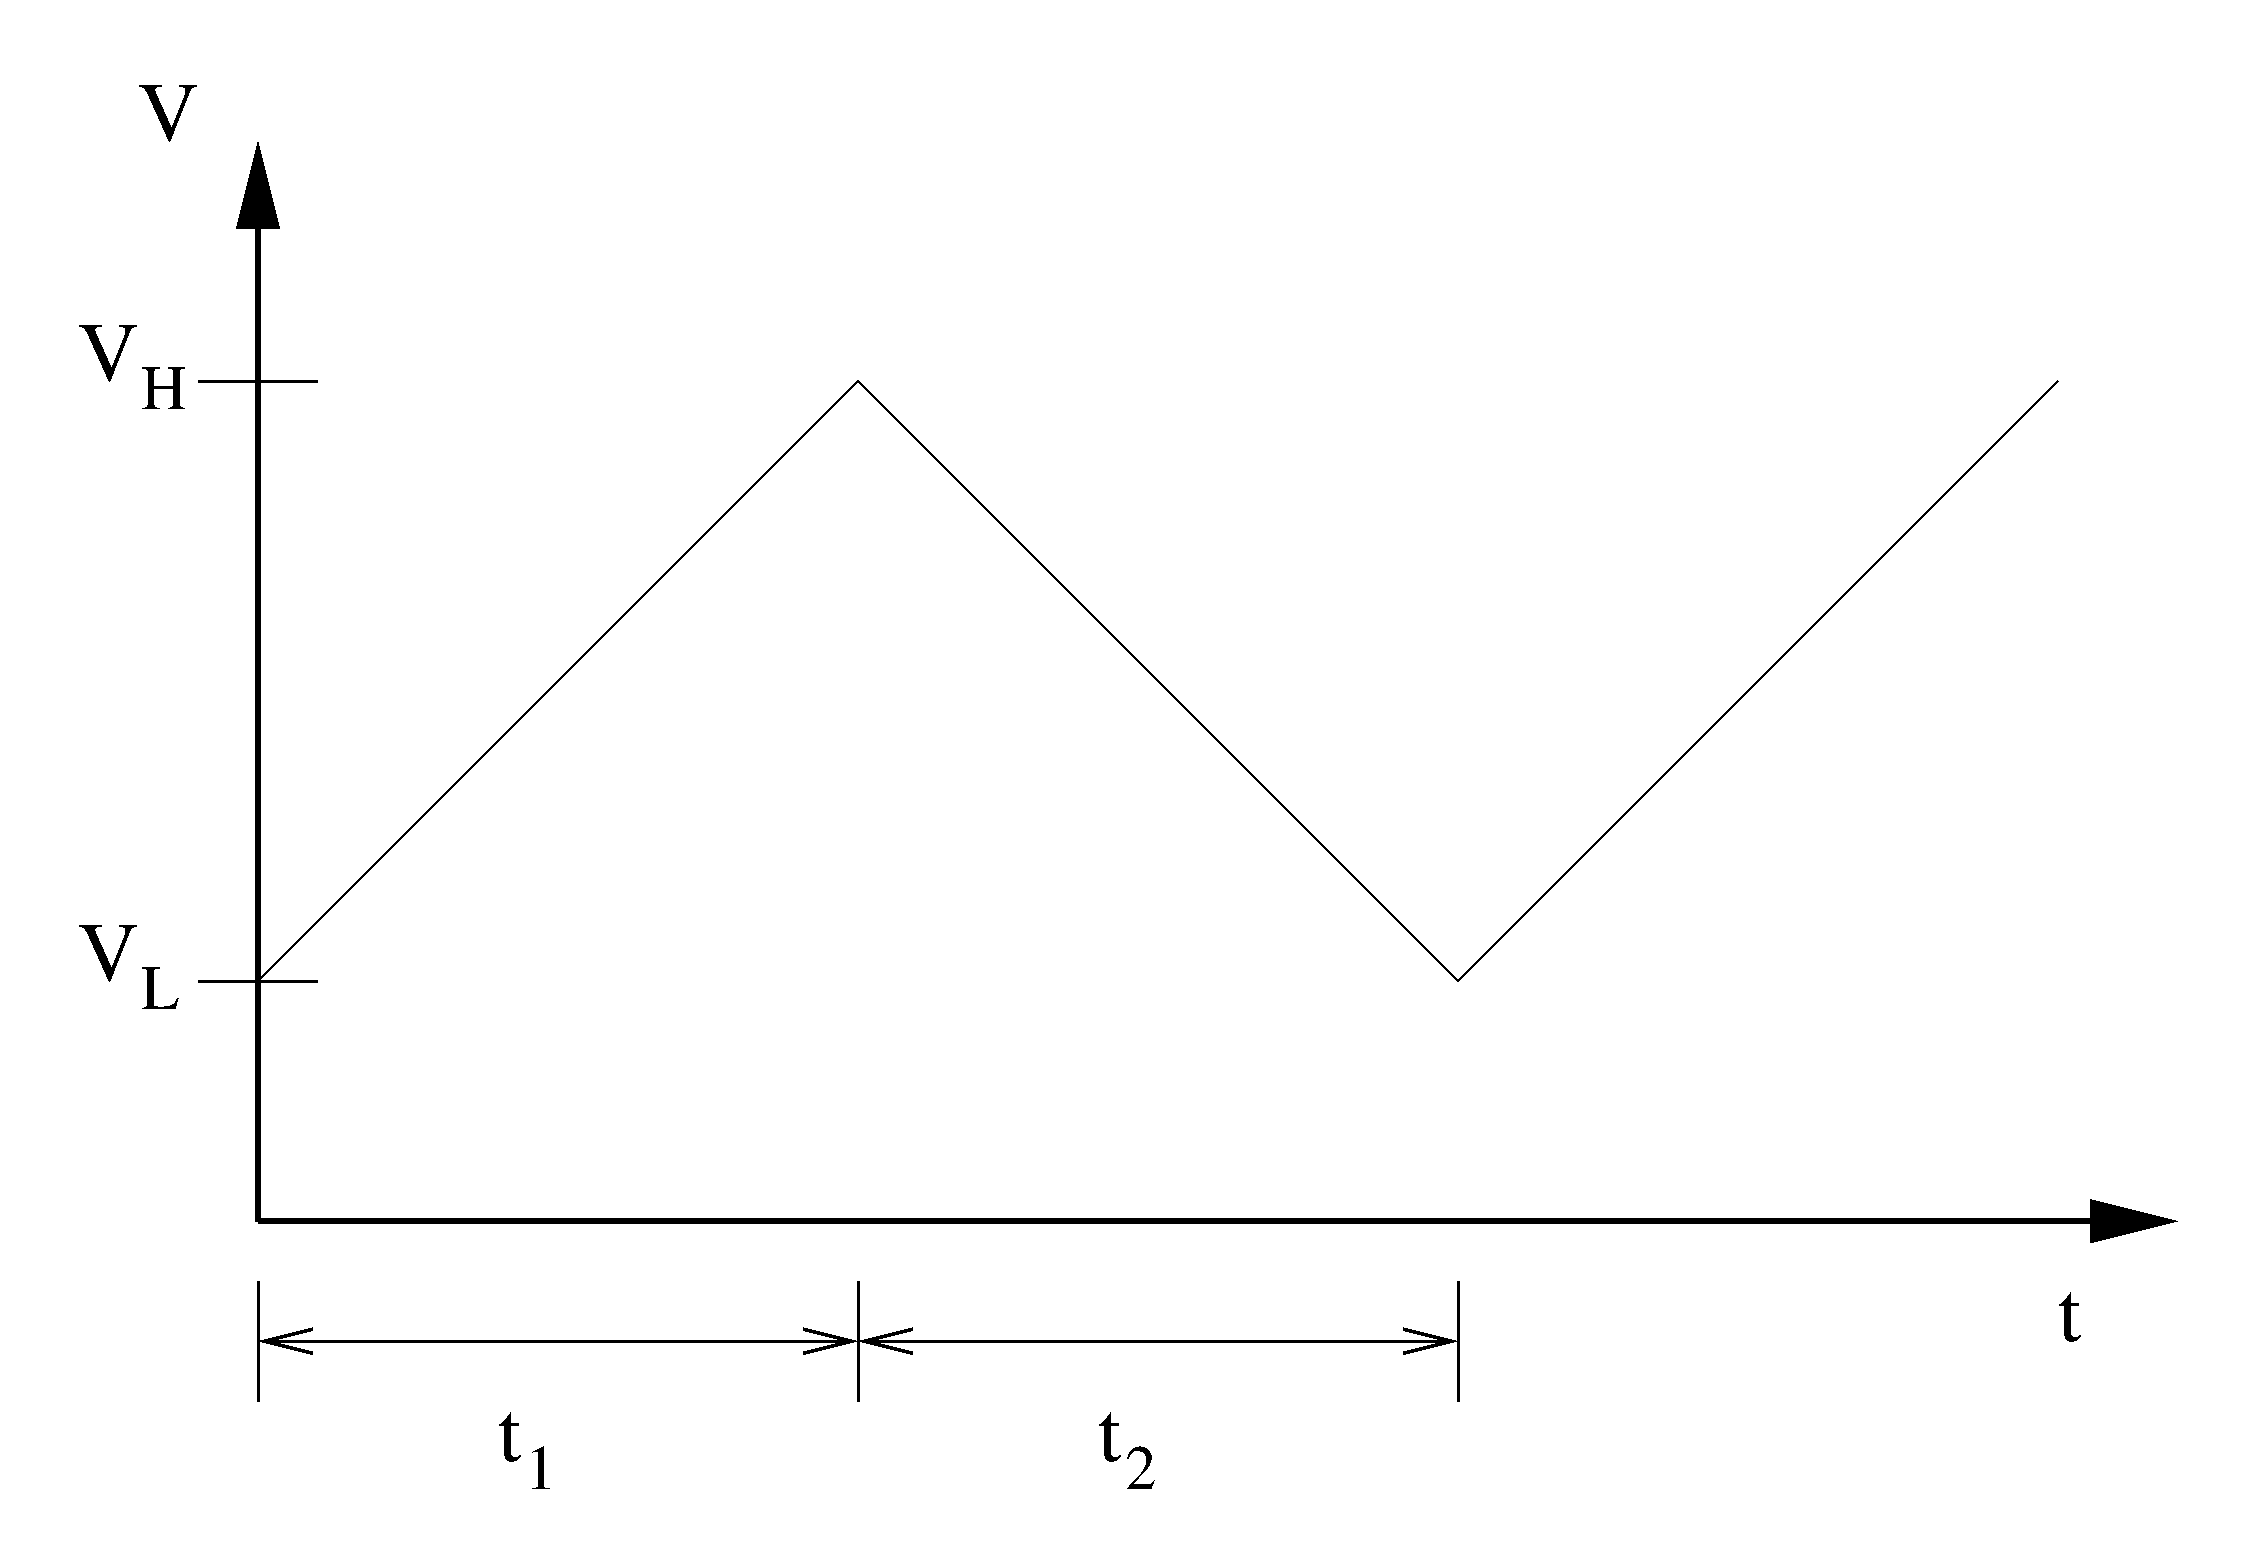 Plot of triangle wave